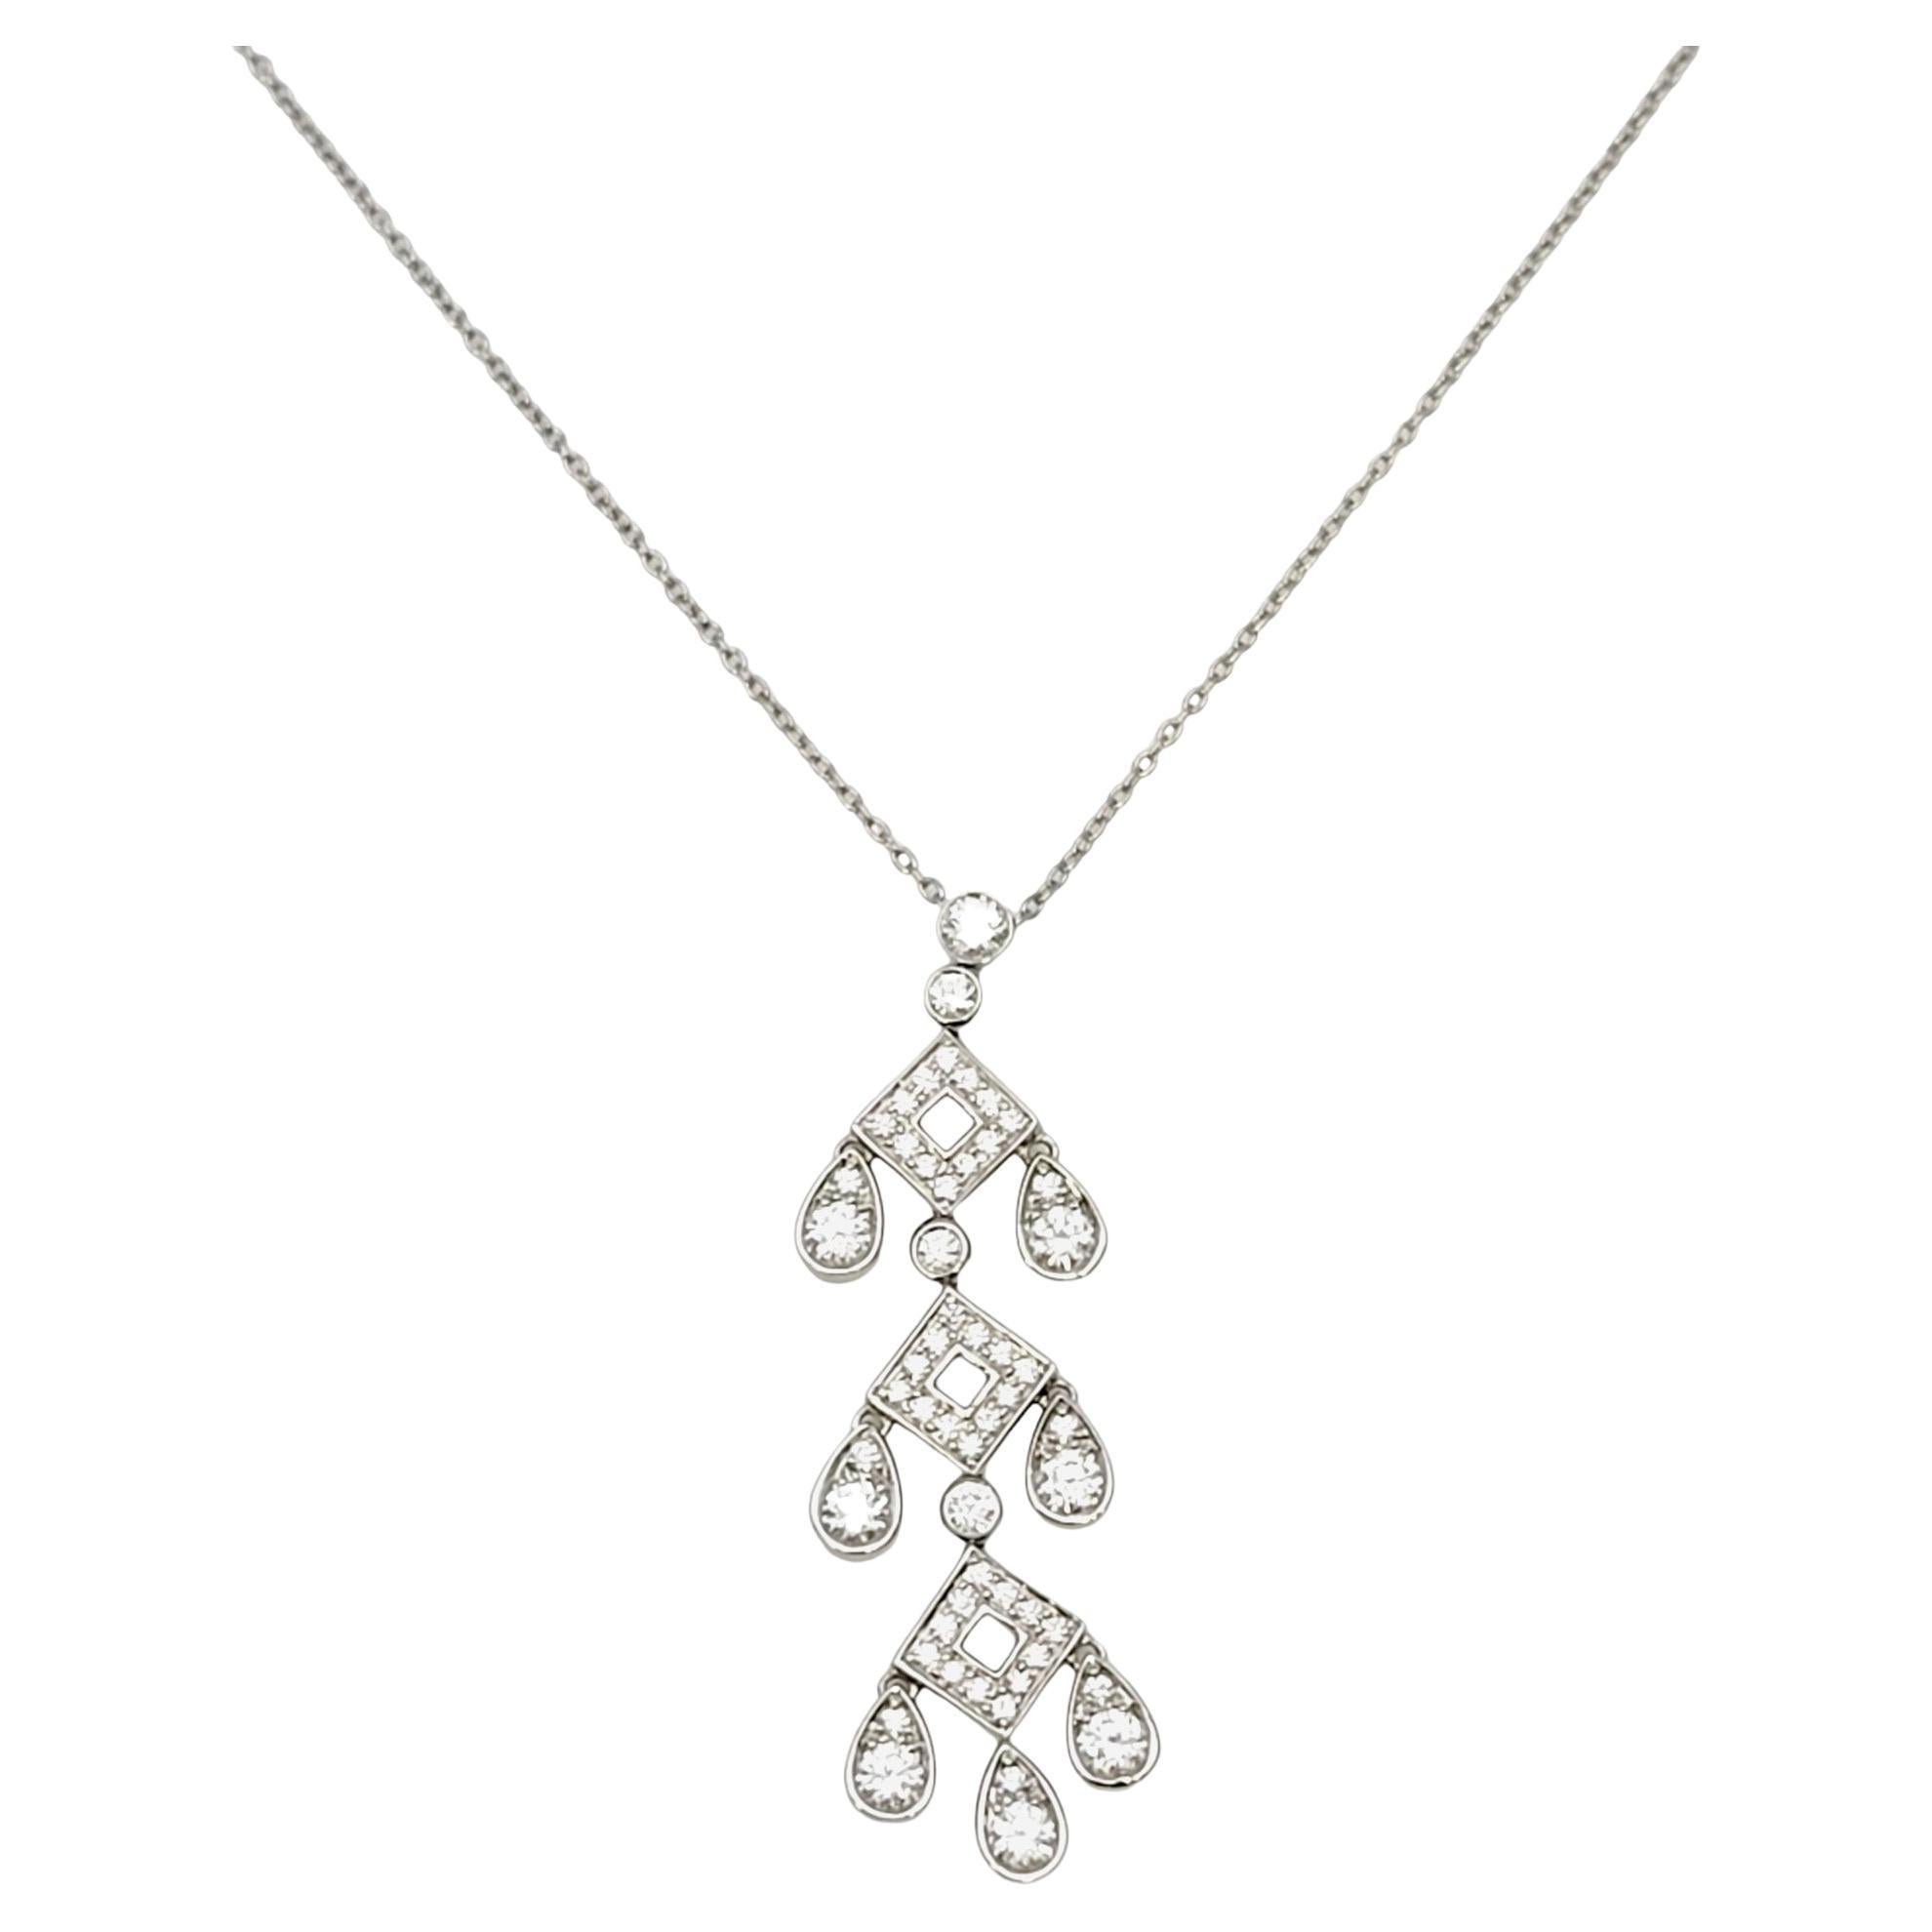 This sparkling Tiffany & Co. Jazz Pagoda diamond drop necklace is absolutely beautiful. The delicate platinum chain and glittering drop of natural round diamonds goes with just about everything. Three open diamond shaped links hang down in an